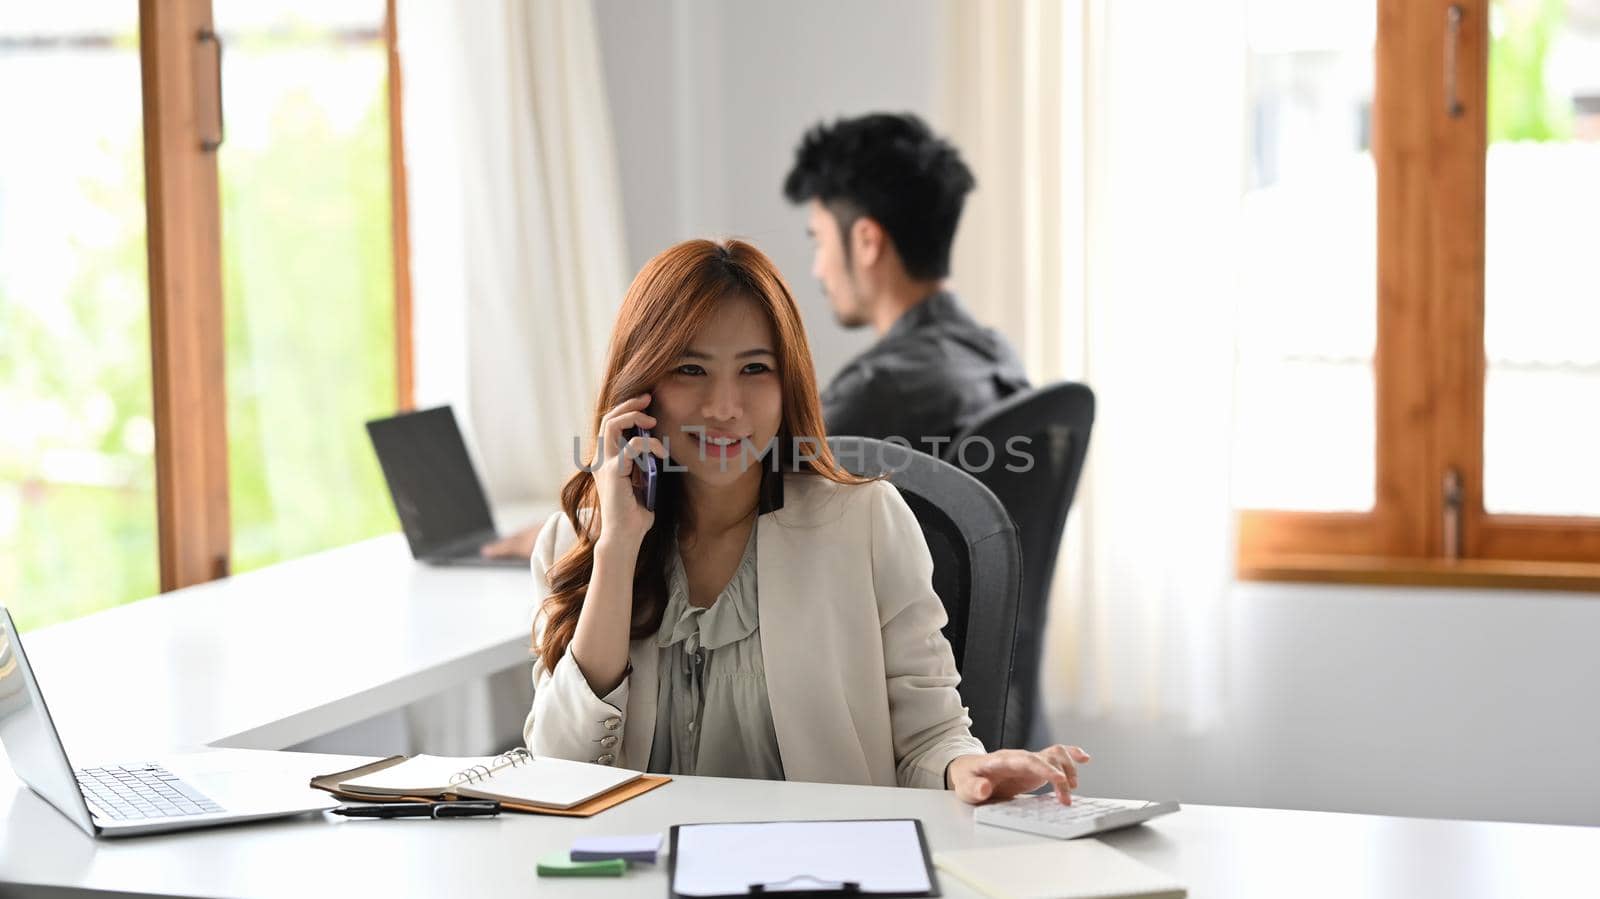 Attractive woman financial advisor having negotiations with client on mobile phone by prathanchorruangsak